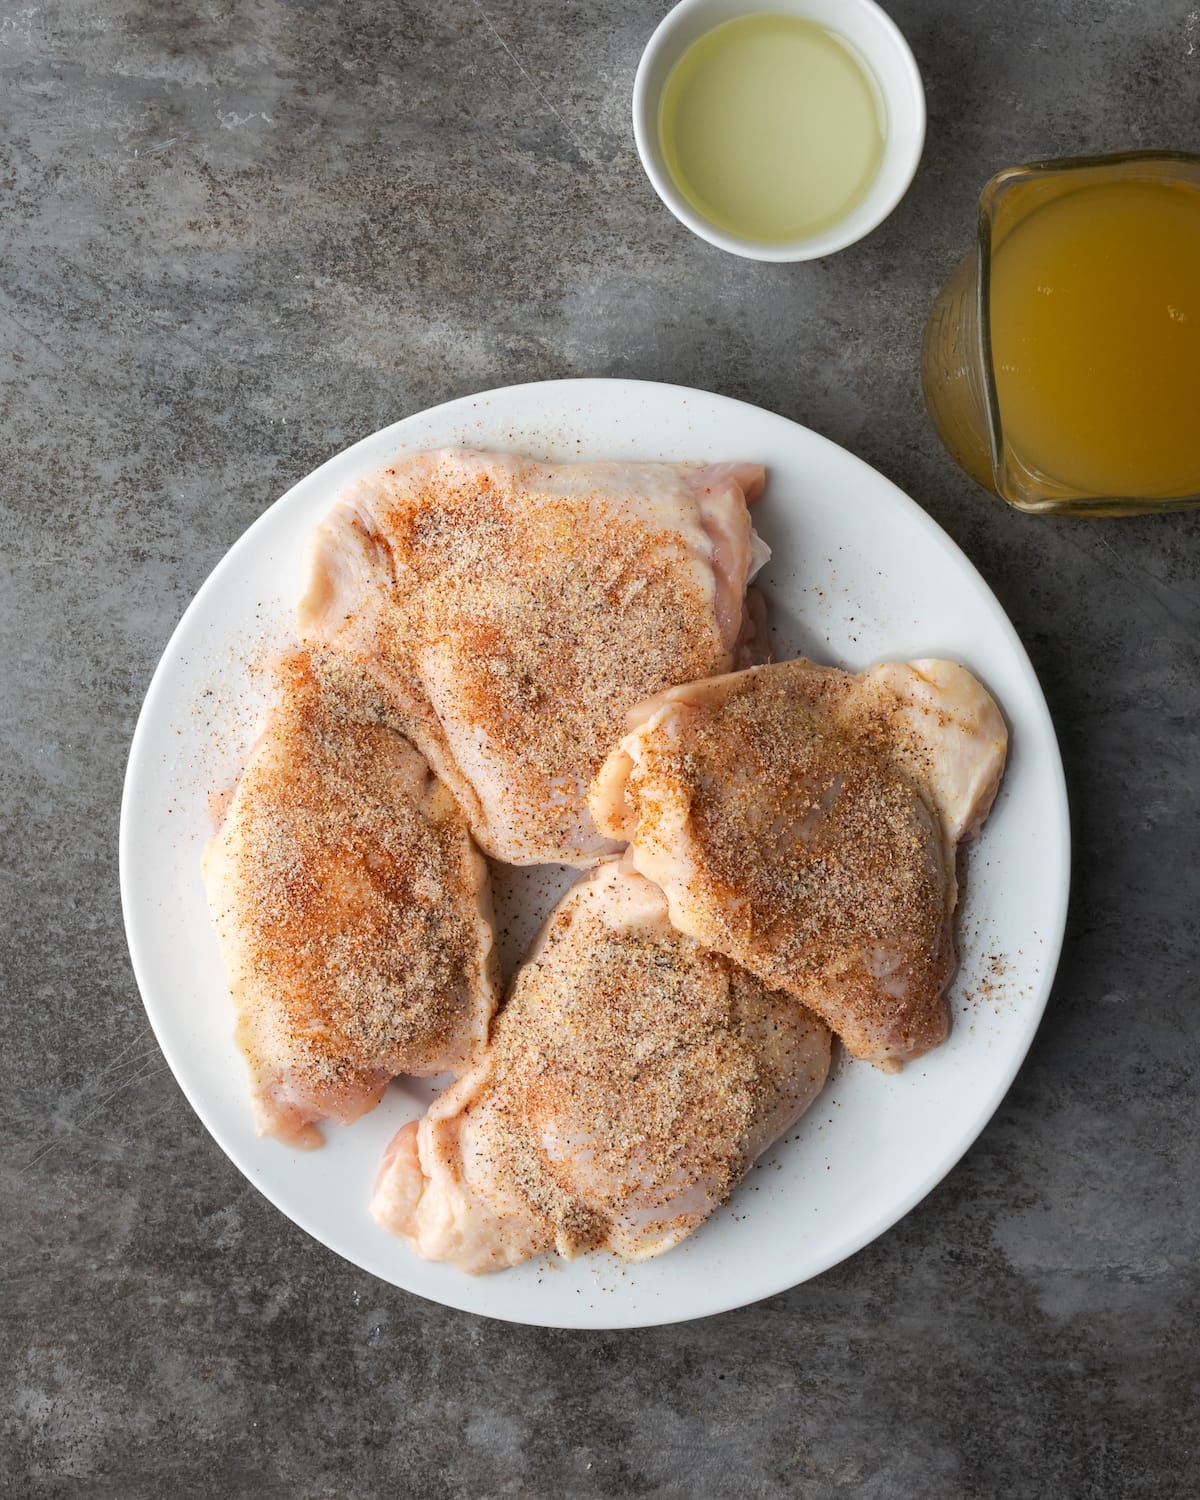 Top view of seasoned uncooked chicken thighs on a white plate.